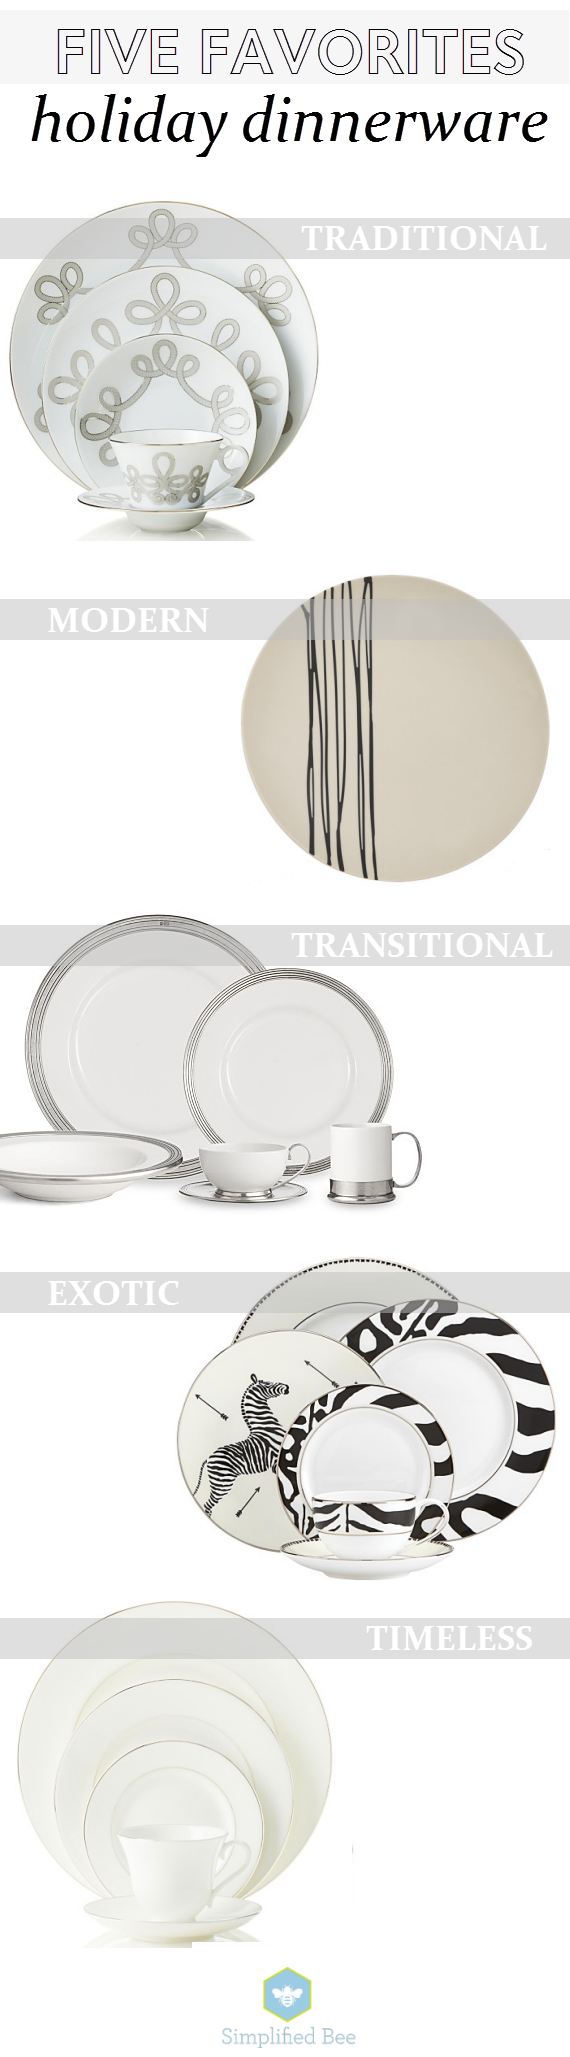 favorite holiday dinnerware // simplified bee #tablescape #holiday2014 #thanksgiving